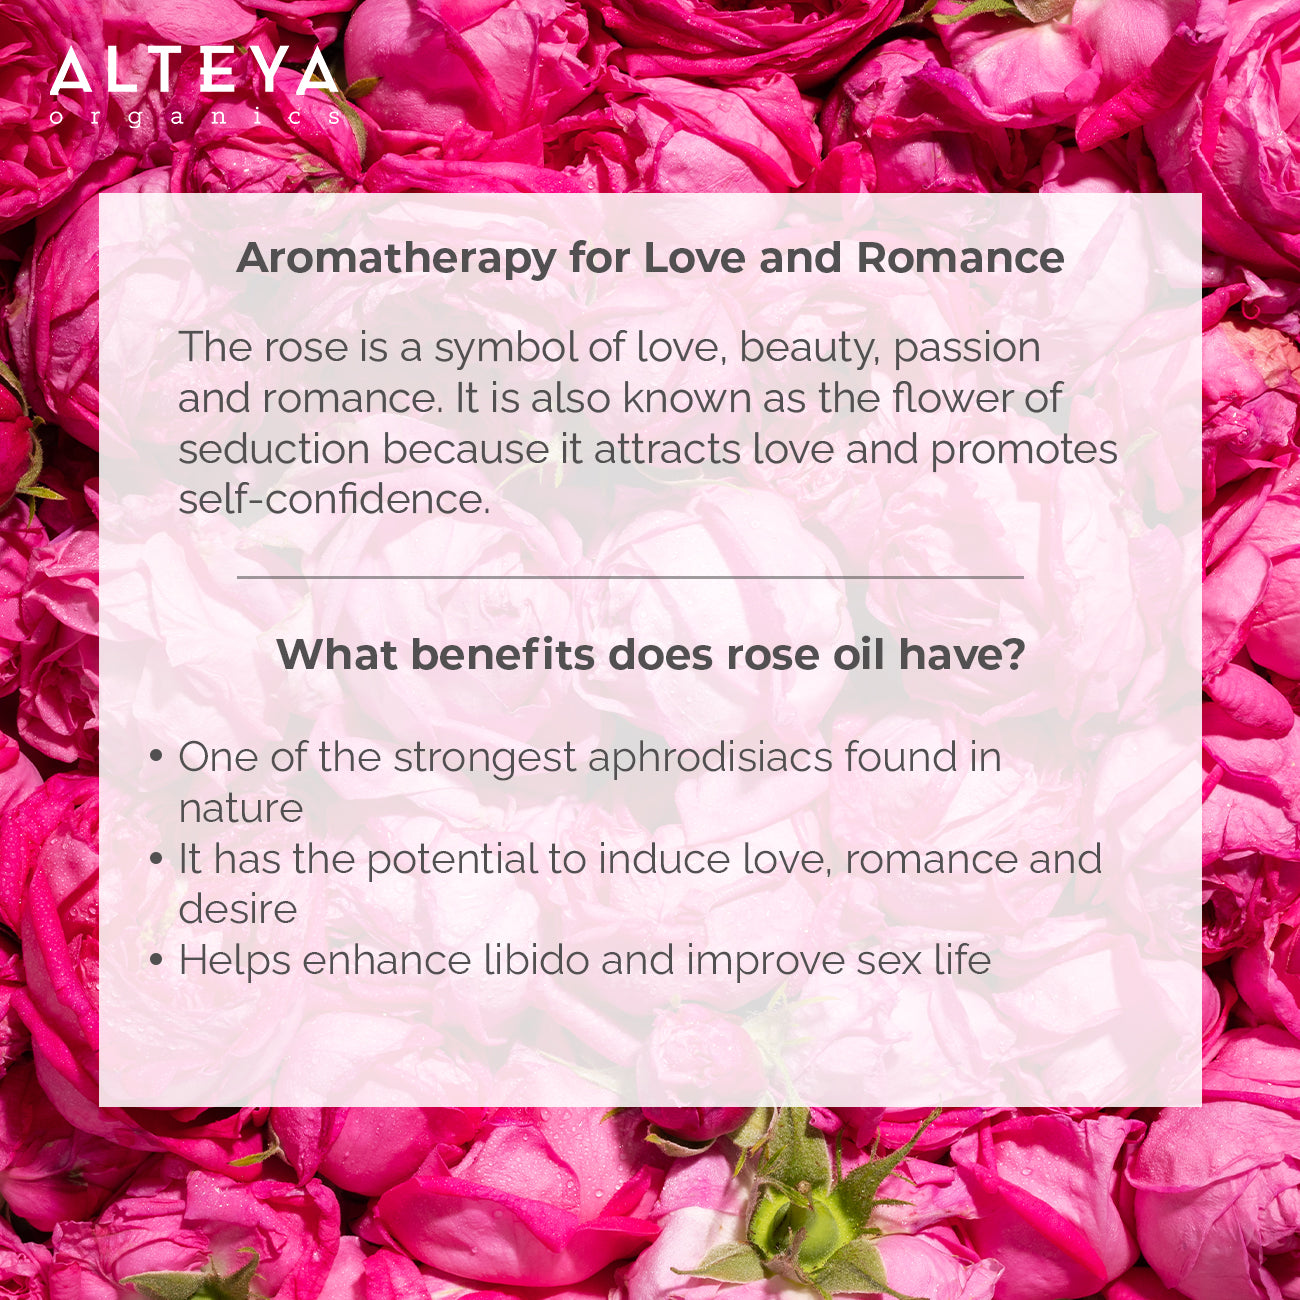 Alteya Organics' Bulgarian Rose Essential Oil - Rose Otto - 100% Pure for love and romance.